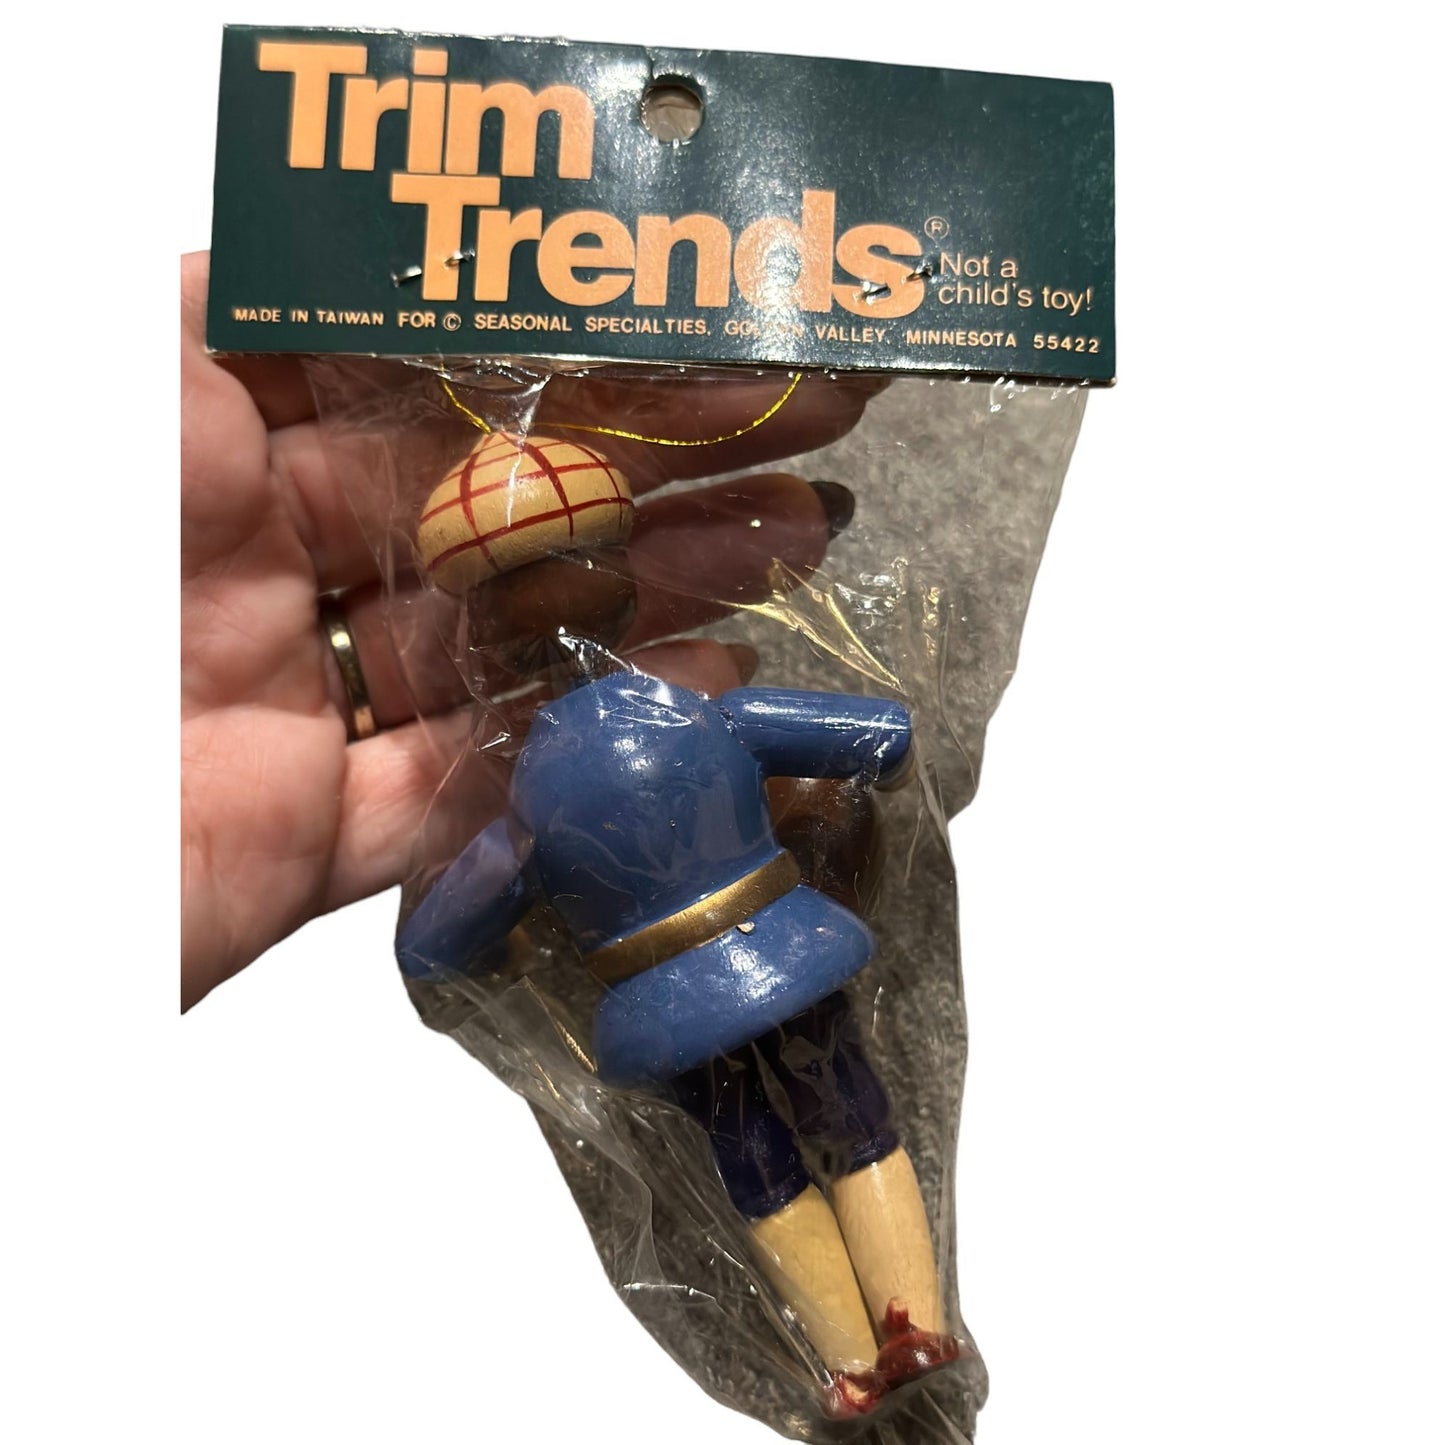 Vintage Trim Trends Not a Child Toy Boy Football Ornament Collectible Taiwan